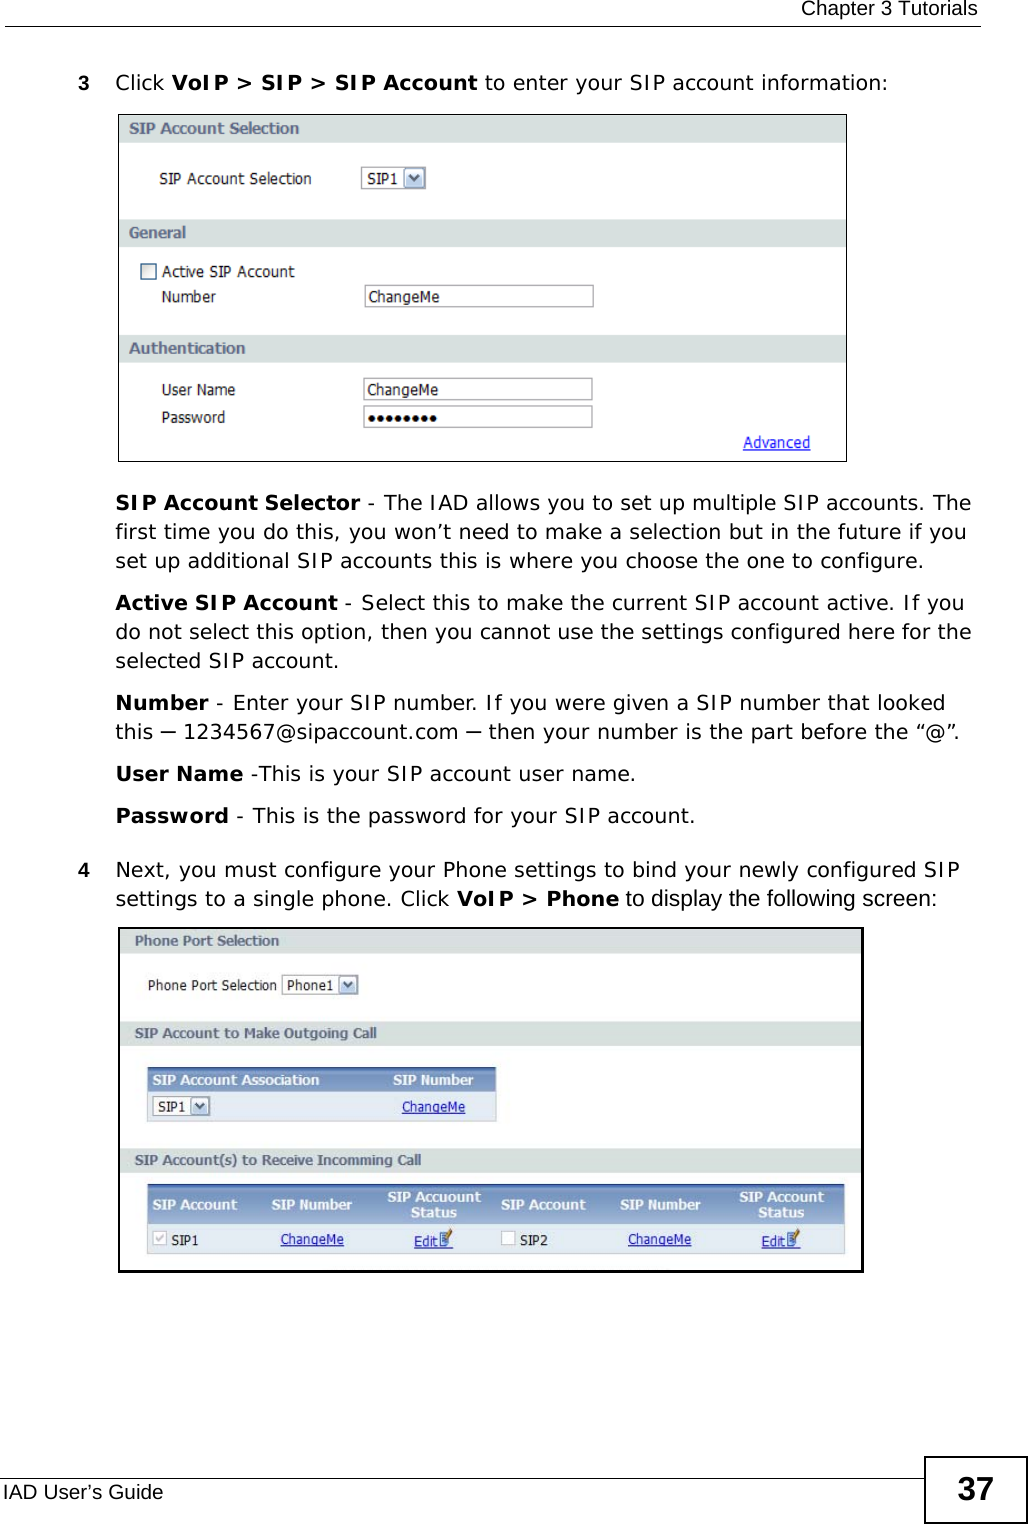  Chapter 3 TutorialsIAD User’s Guide 373Click VoIP &gt; SIP &gt; SIP Account to enter your SIP account information: SIP Account Selector - The IAD allows you to set up multiple SIP accounts. The first time you do this, you won’t need to make a selection but in the future if you set up additional SIP accounts this is where you choose the one to configure.Active SIP Account - Select this to make the current SIP account active. If you do not select this option, then you cannot use the settings configured here for the selected SIP account.Number - Enter your SIP number. If you were given a SIP number that looked this – 1234567@sipaccount.com – then your number is the part before the “@”.User Name -This is your SIP account user name.Password - This is the password for your SIP account.4Next, you must configure your Phone settings to bind your newly configured SIP settings to a single phone. Click VoIP &gt; Phone to display the following screen: